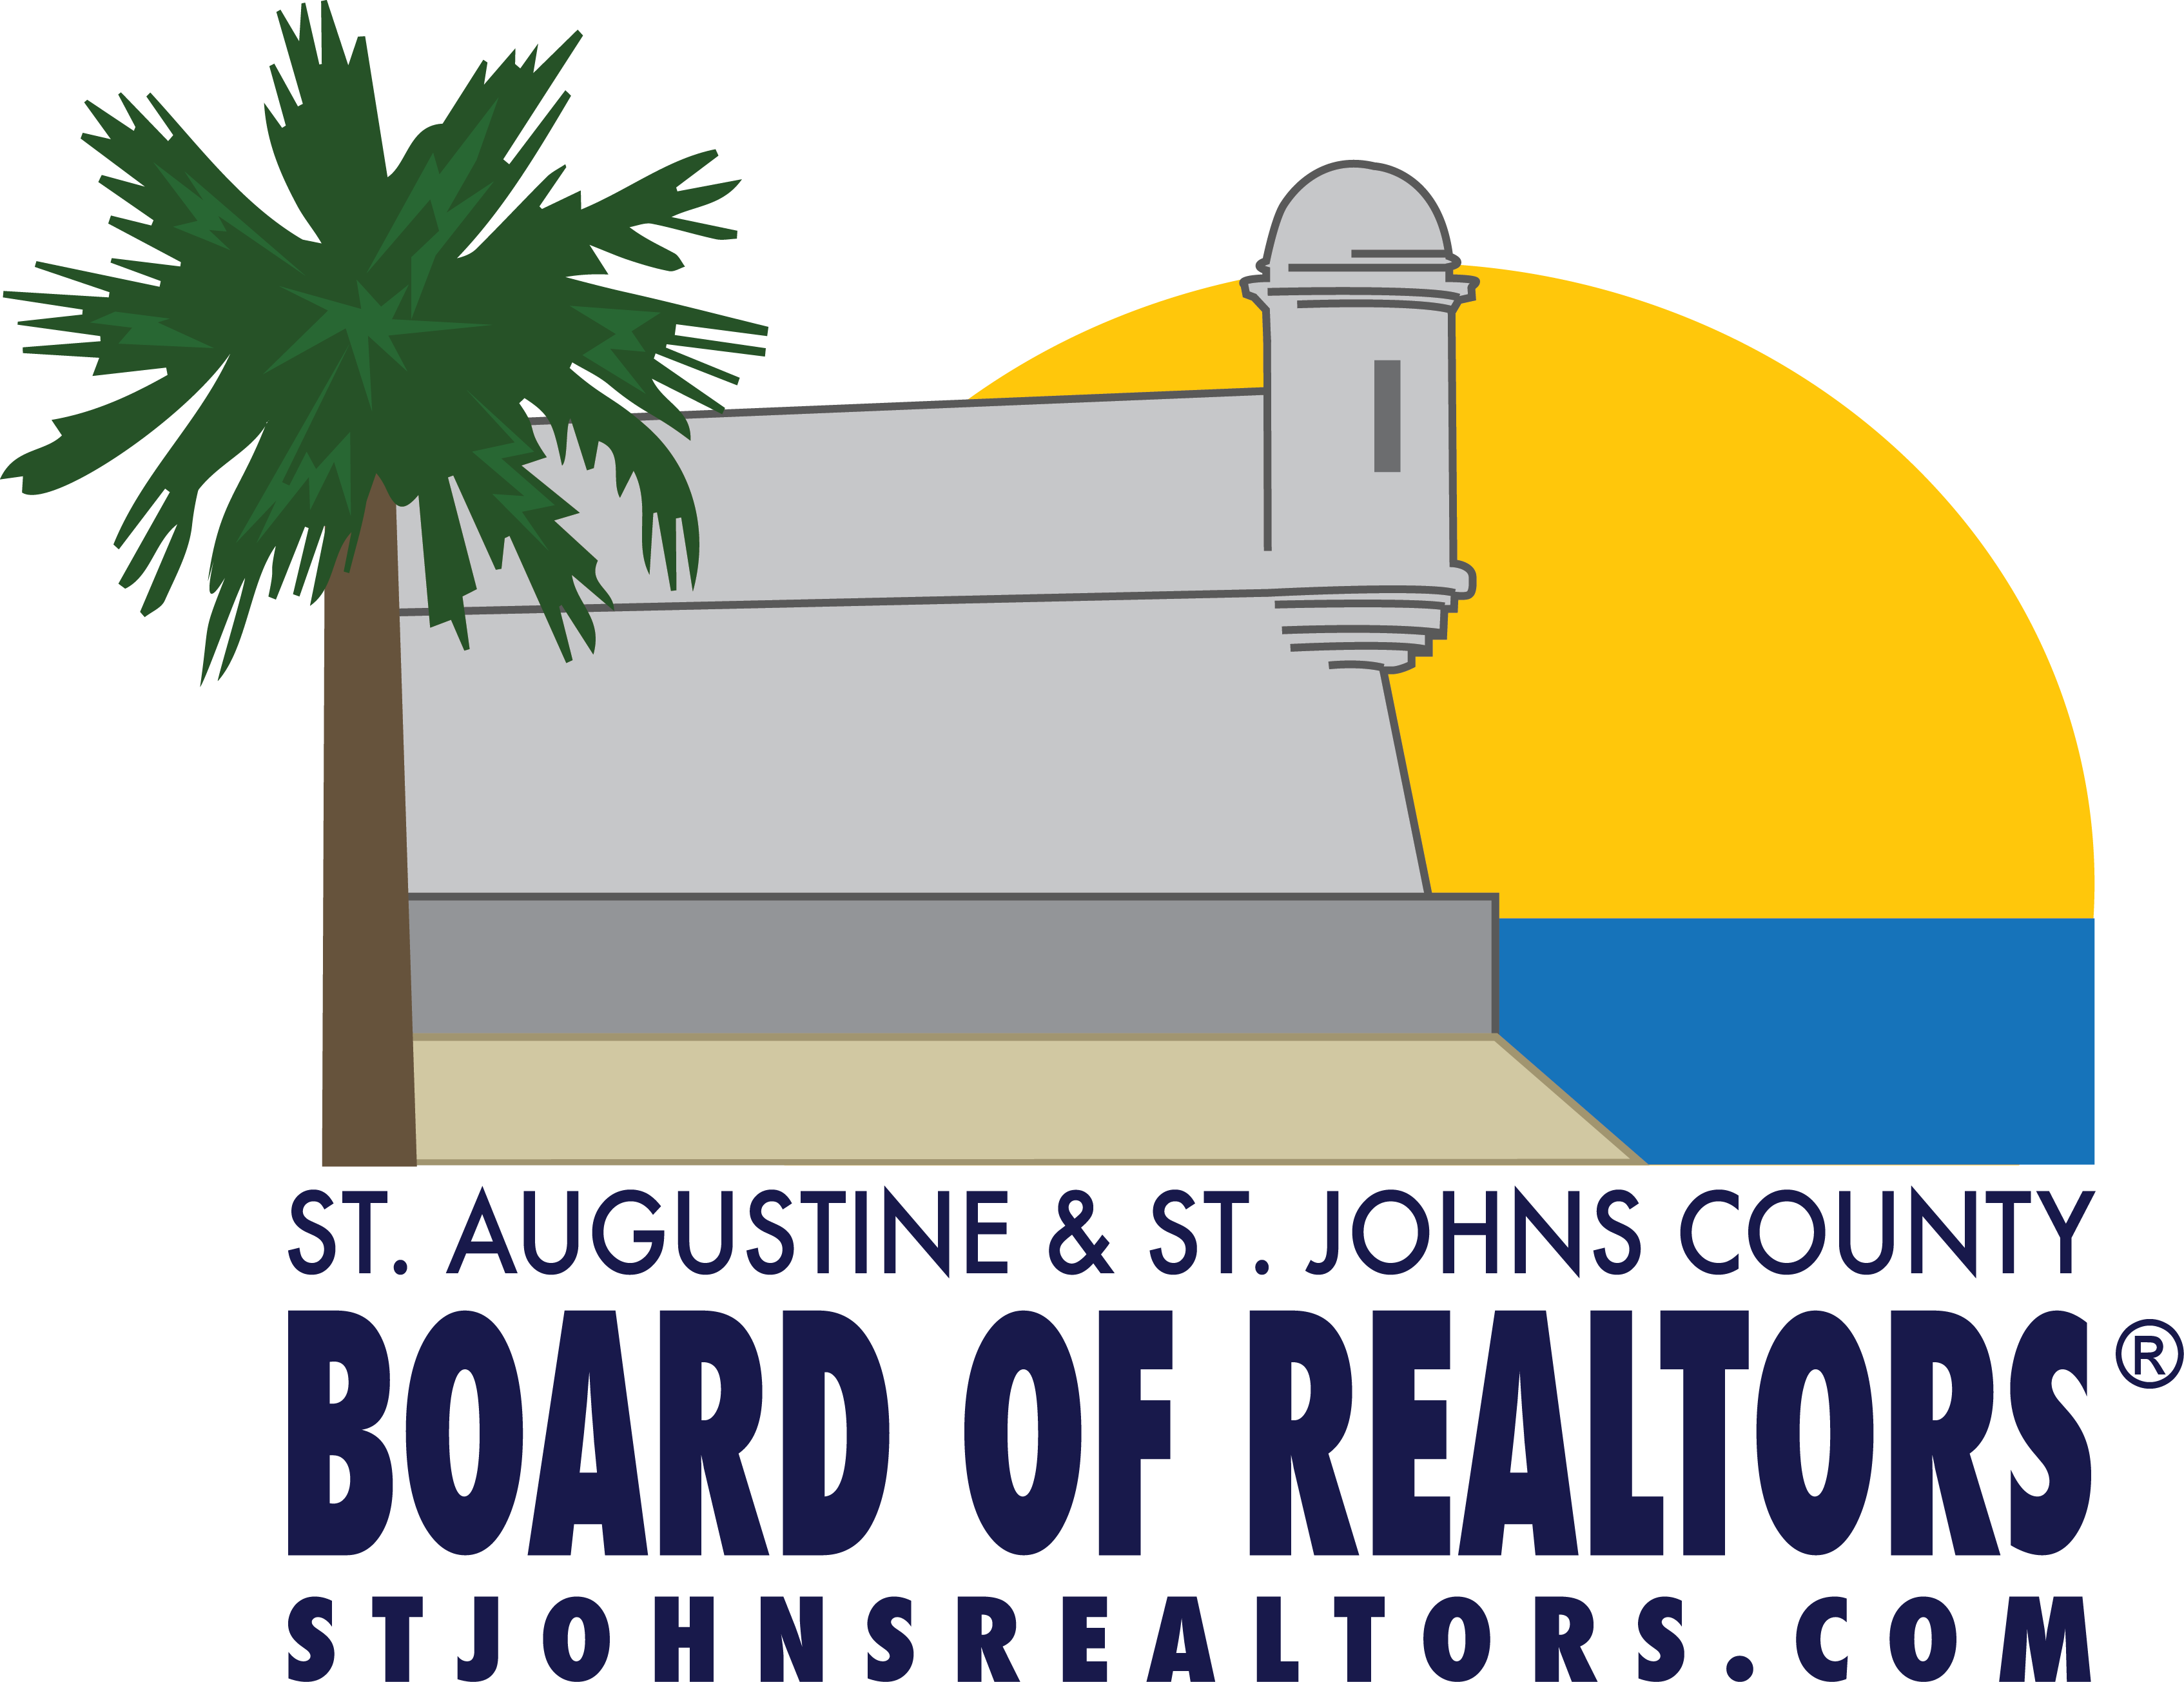 St. Augustine & St. Johns County Board of Realtors